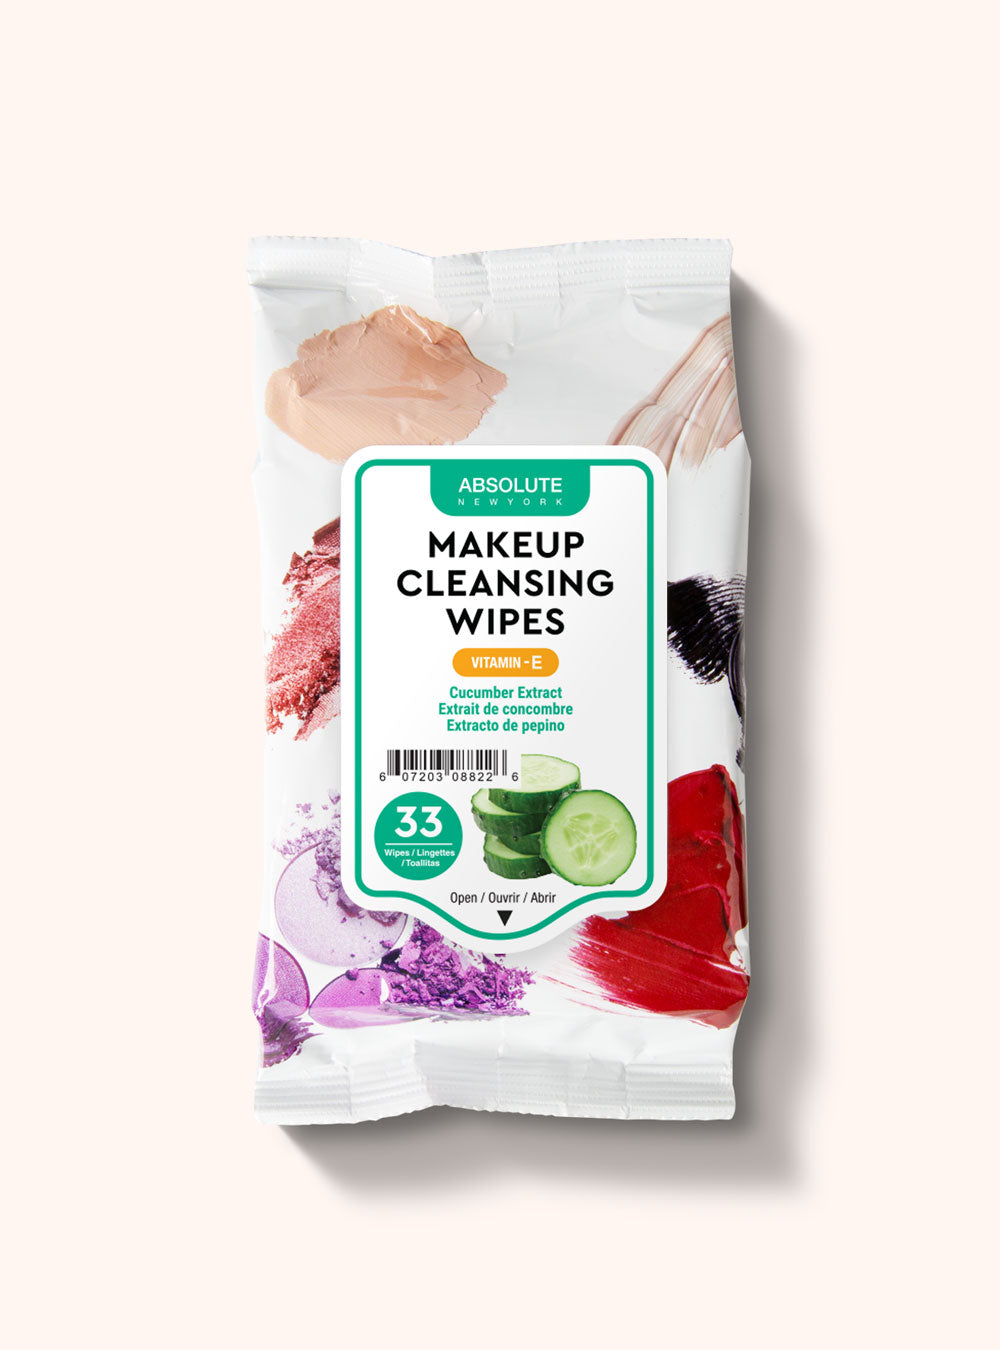 Makeup Cleansing Tissues (33 Count) || Cucumber